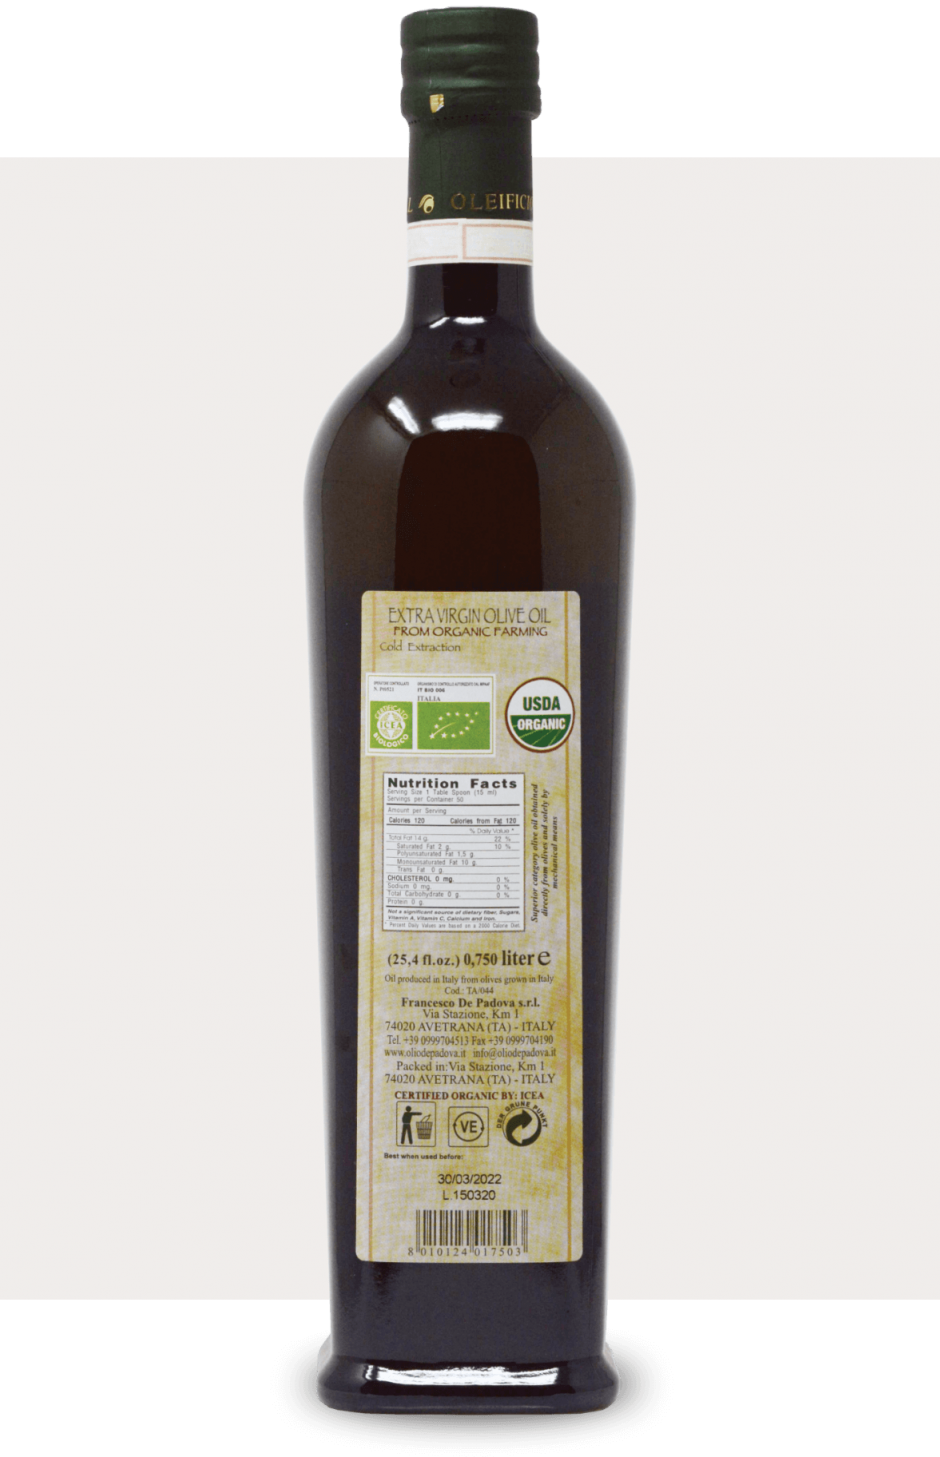 Cold-pressed organic extra virgin olive oil